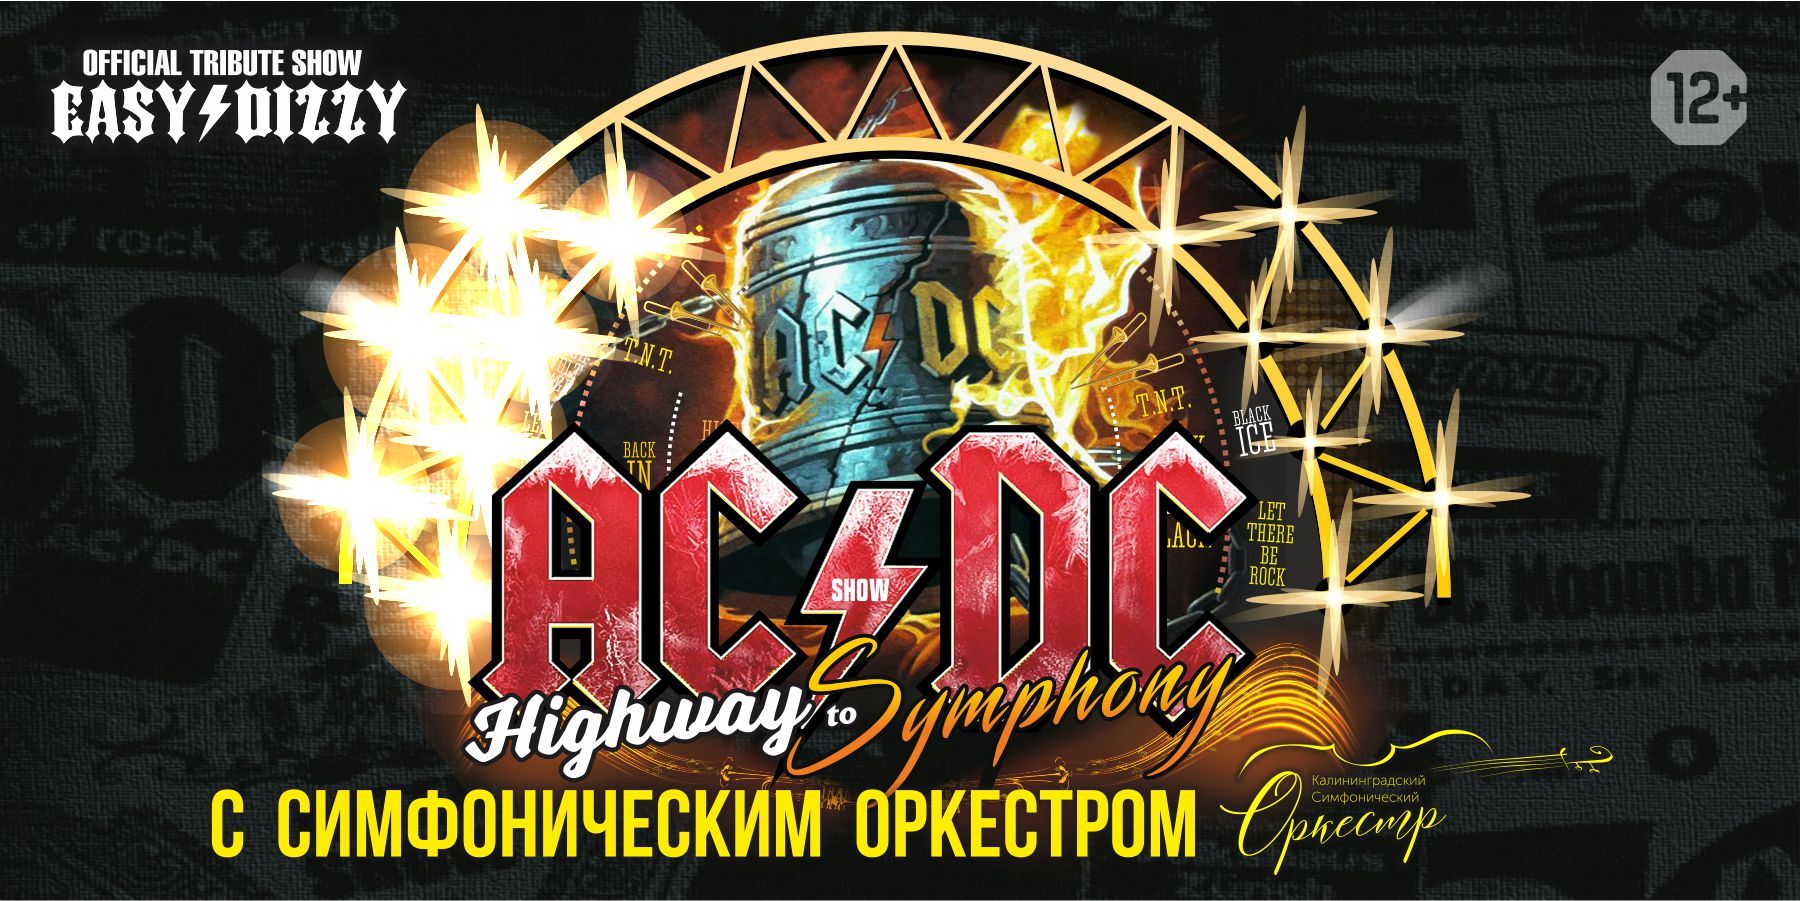 Highway Symphony - AC/DC Orchestra Show 